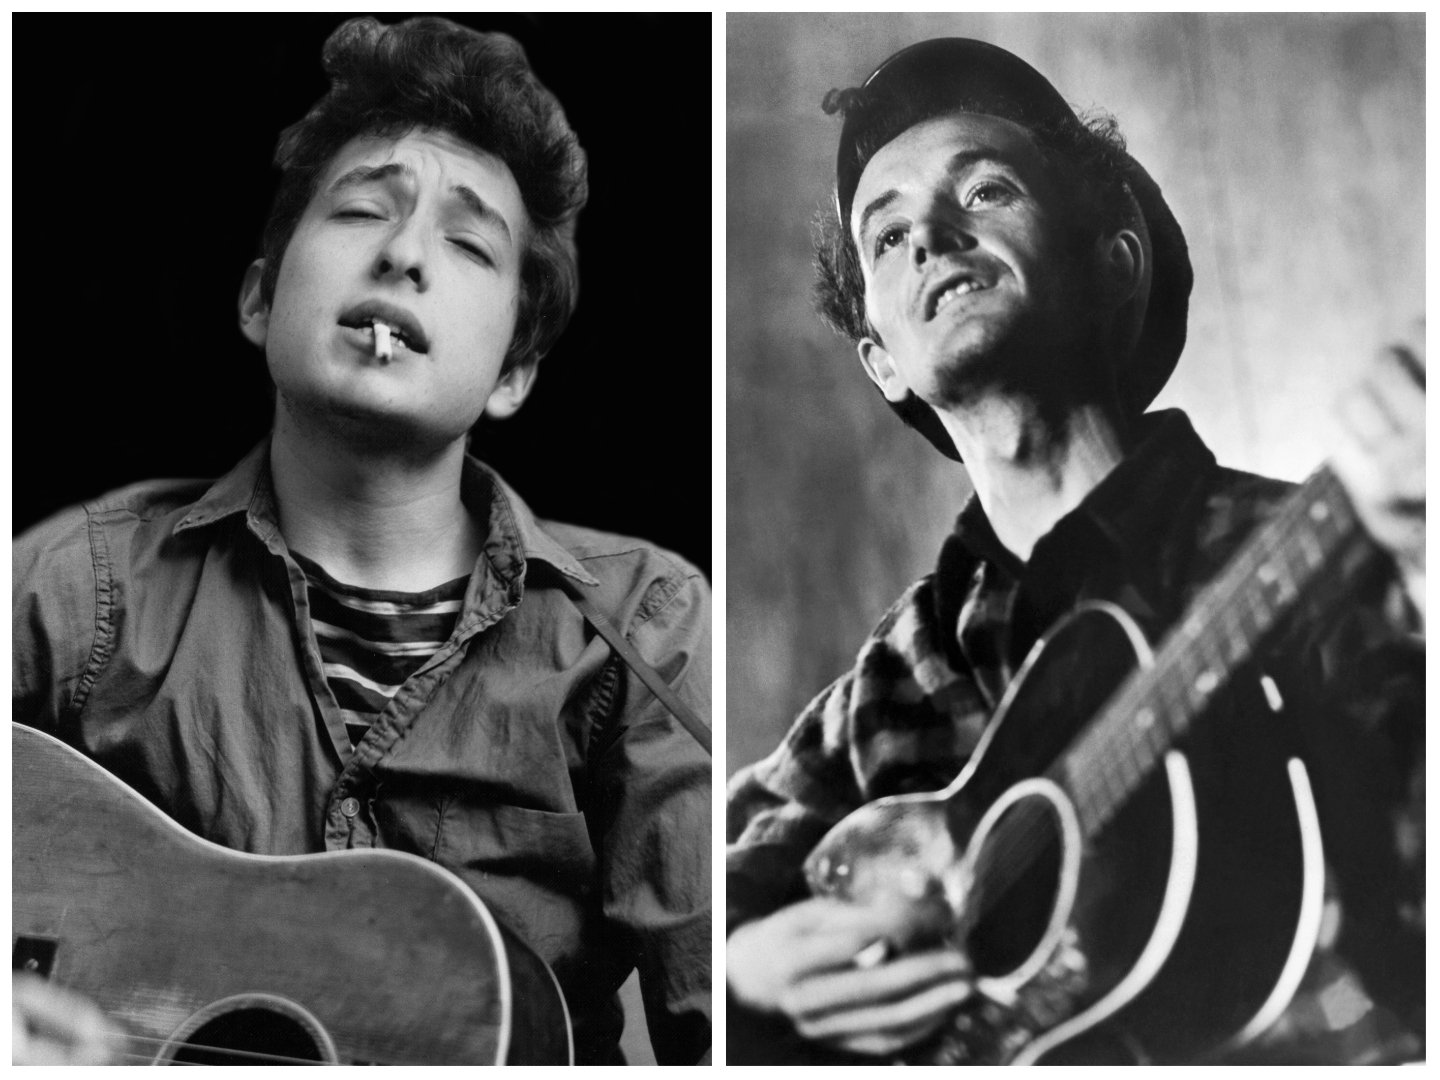 A black and white picture of Bob Dylan playing guitar with a cigarette in his mouth. Woody Guthrie wears a hat and plays guitar.